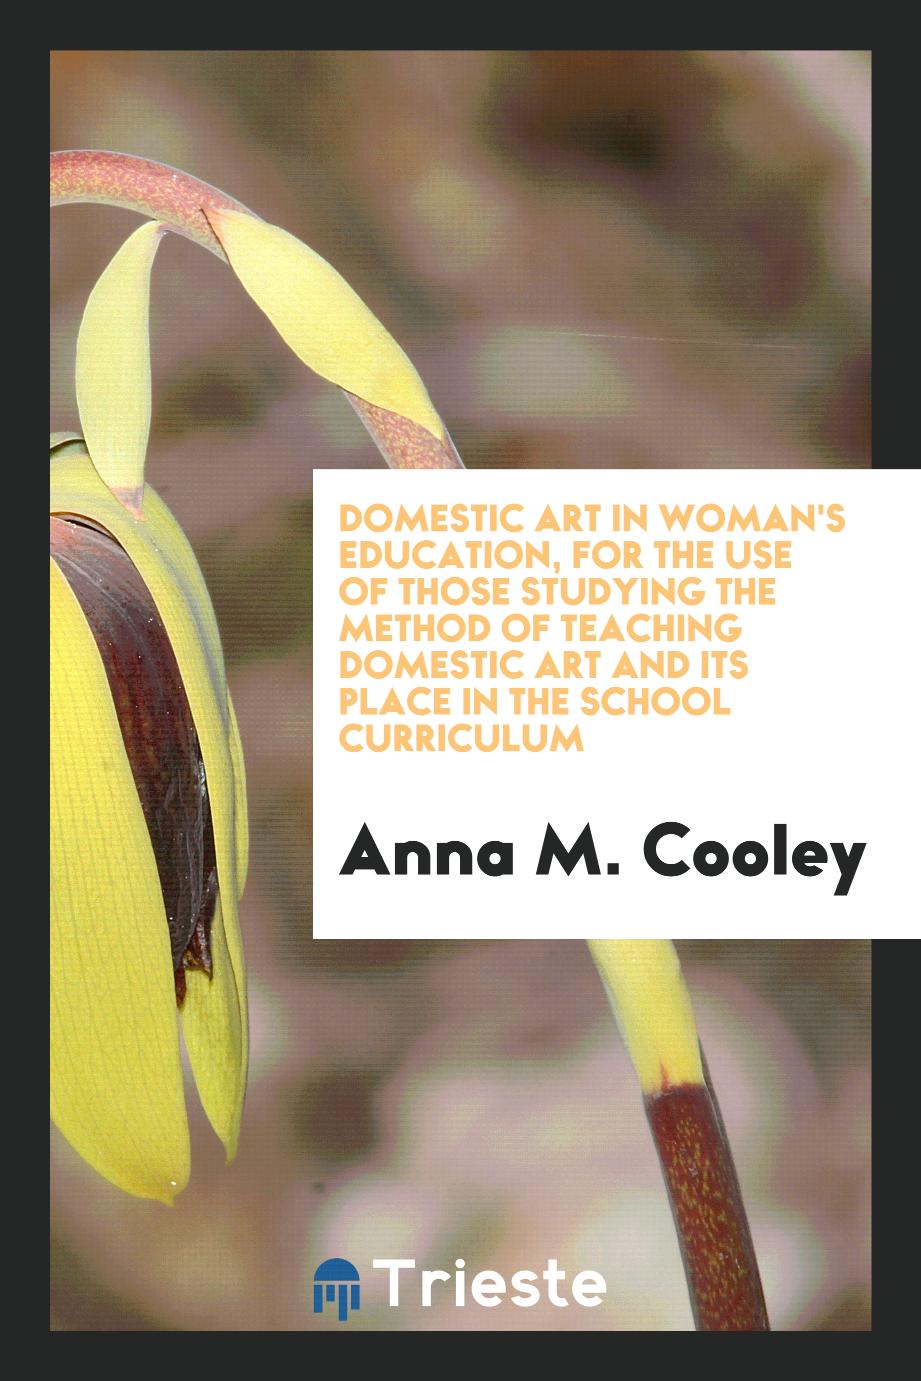 Domestic art in woman's education, for the use of those studying the method of teaching domestic art and its place in the school curriculum